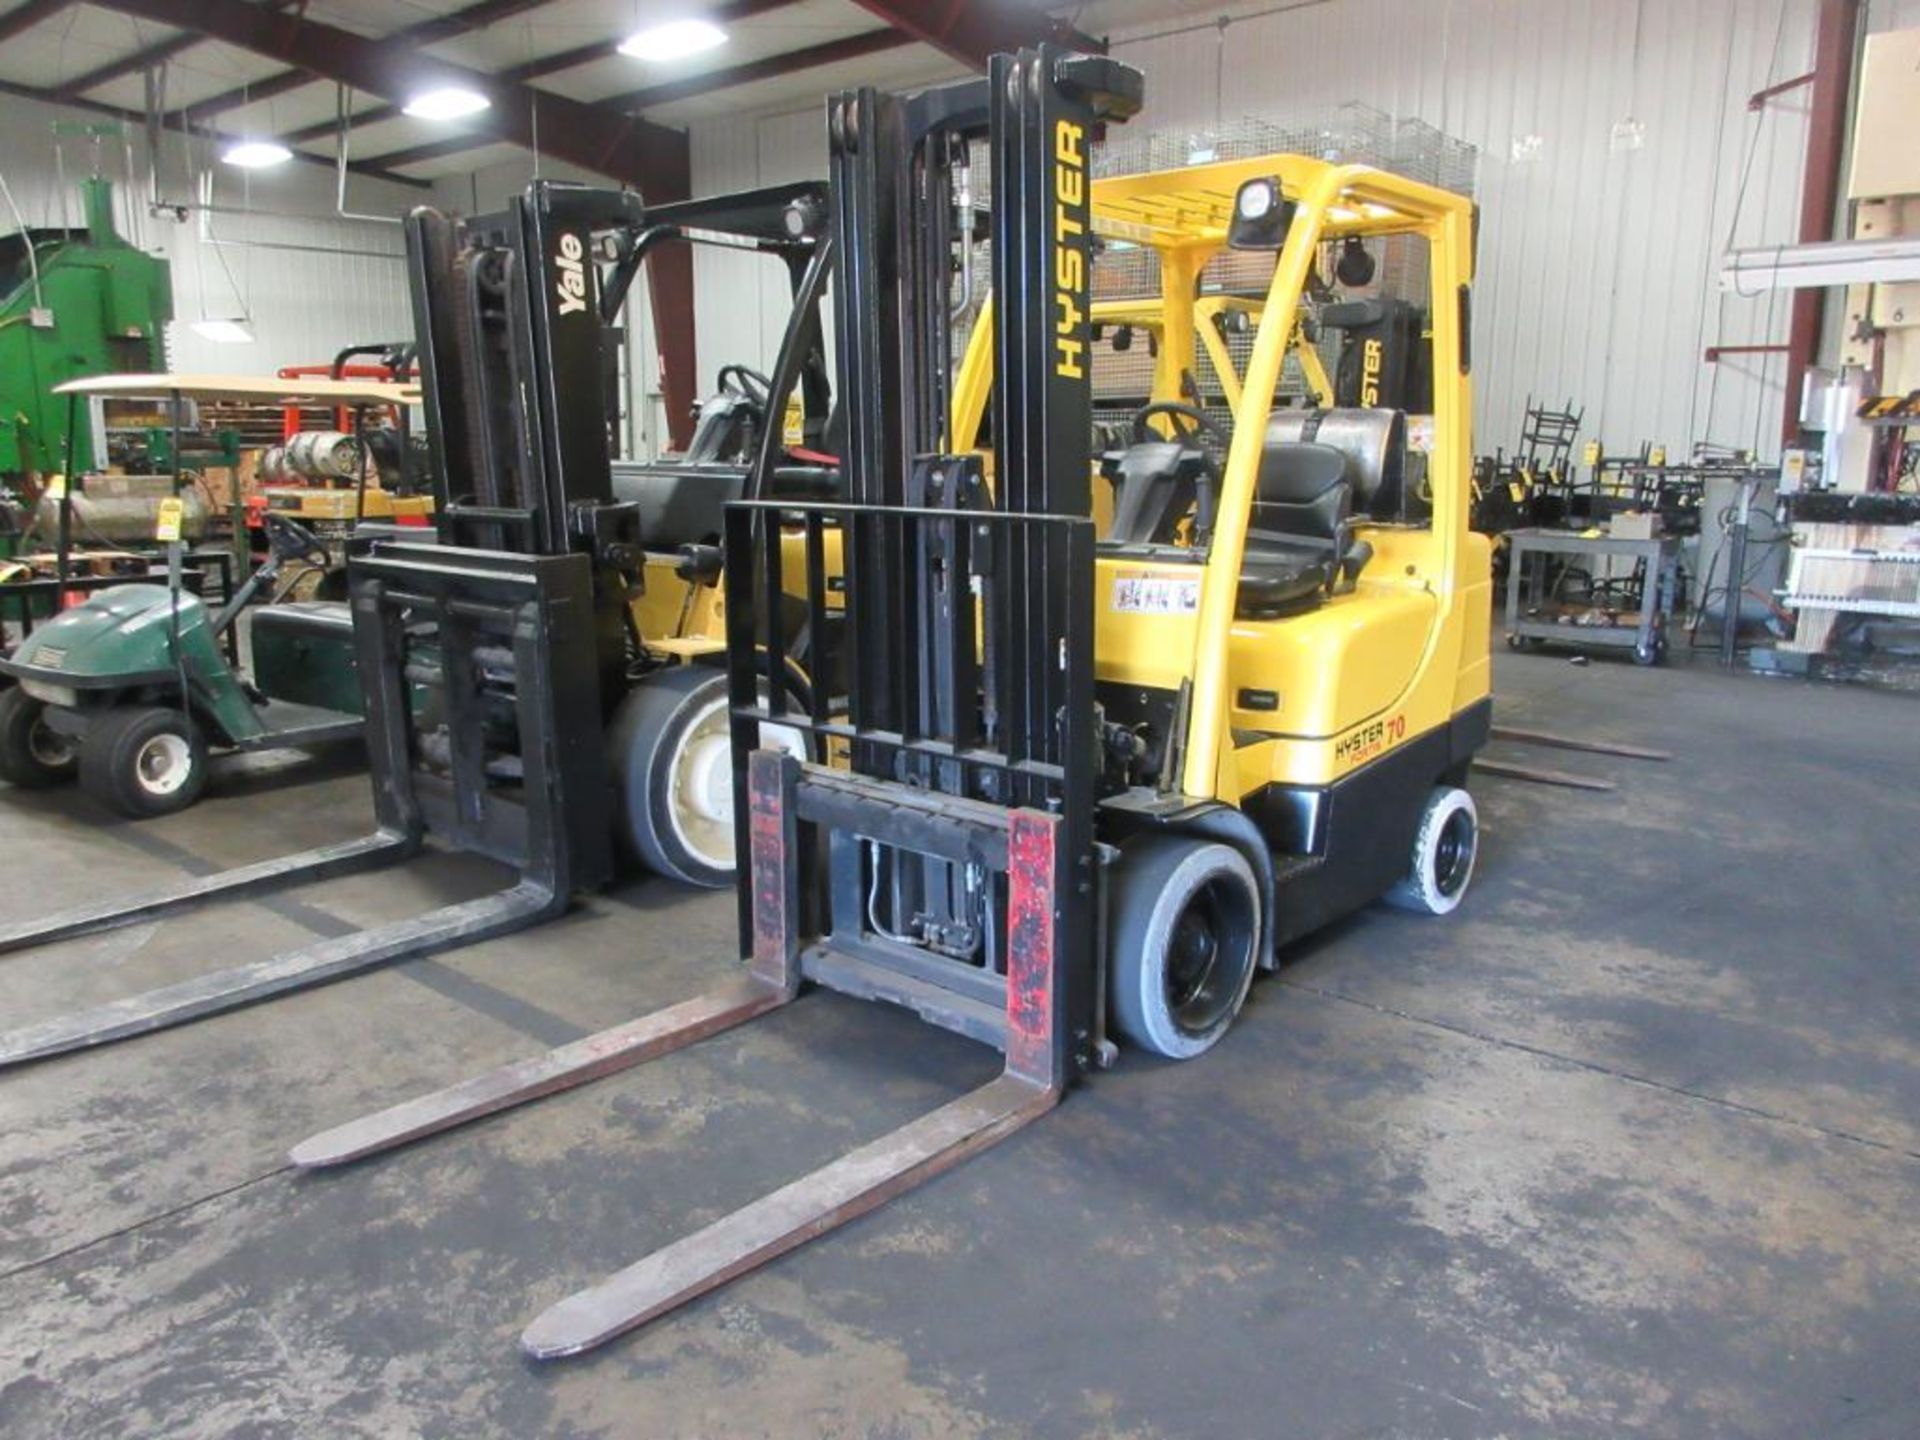 2009 HYSTER 7,000-LB. CAP. LPG FORKLIFT, 3-STAGE MAST, 187 IN. MAX. LOAD HT., CUSHION TIRES, LEVER